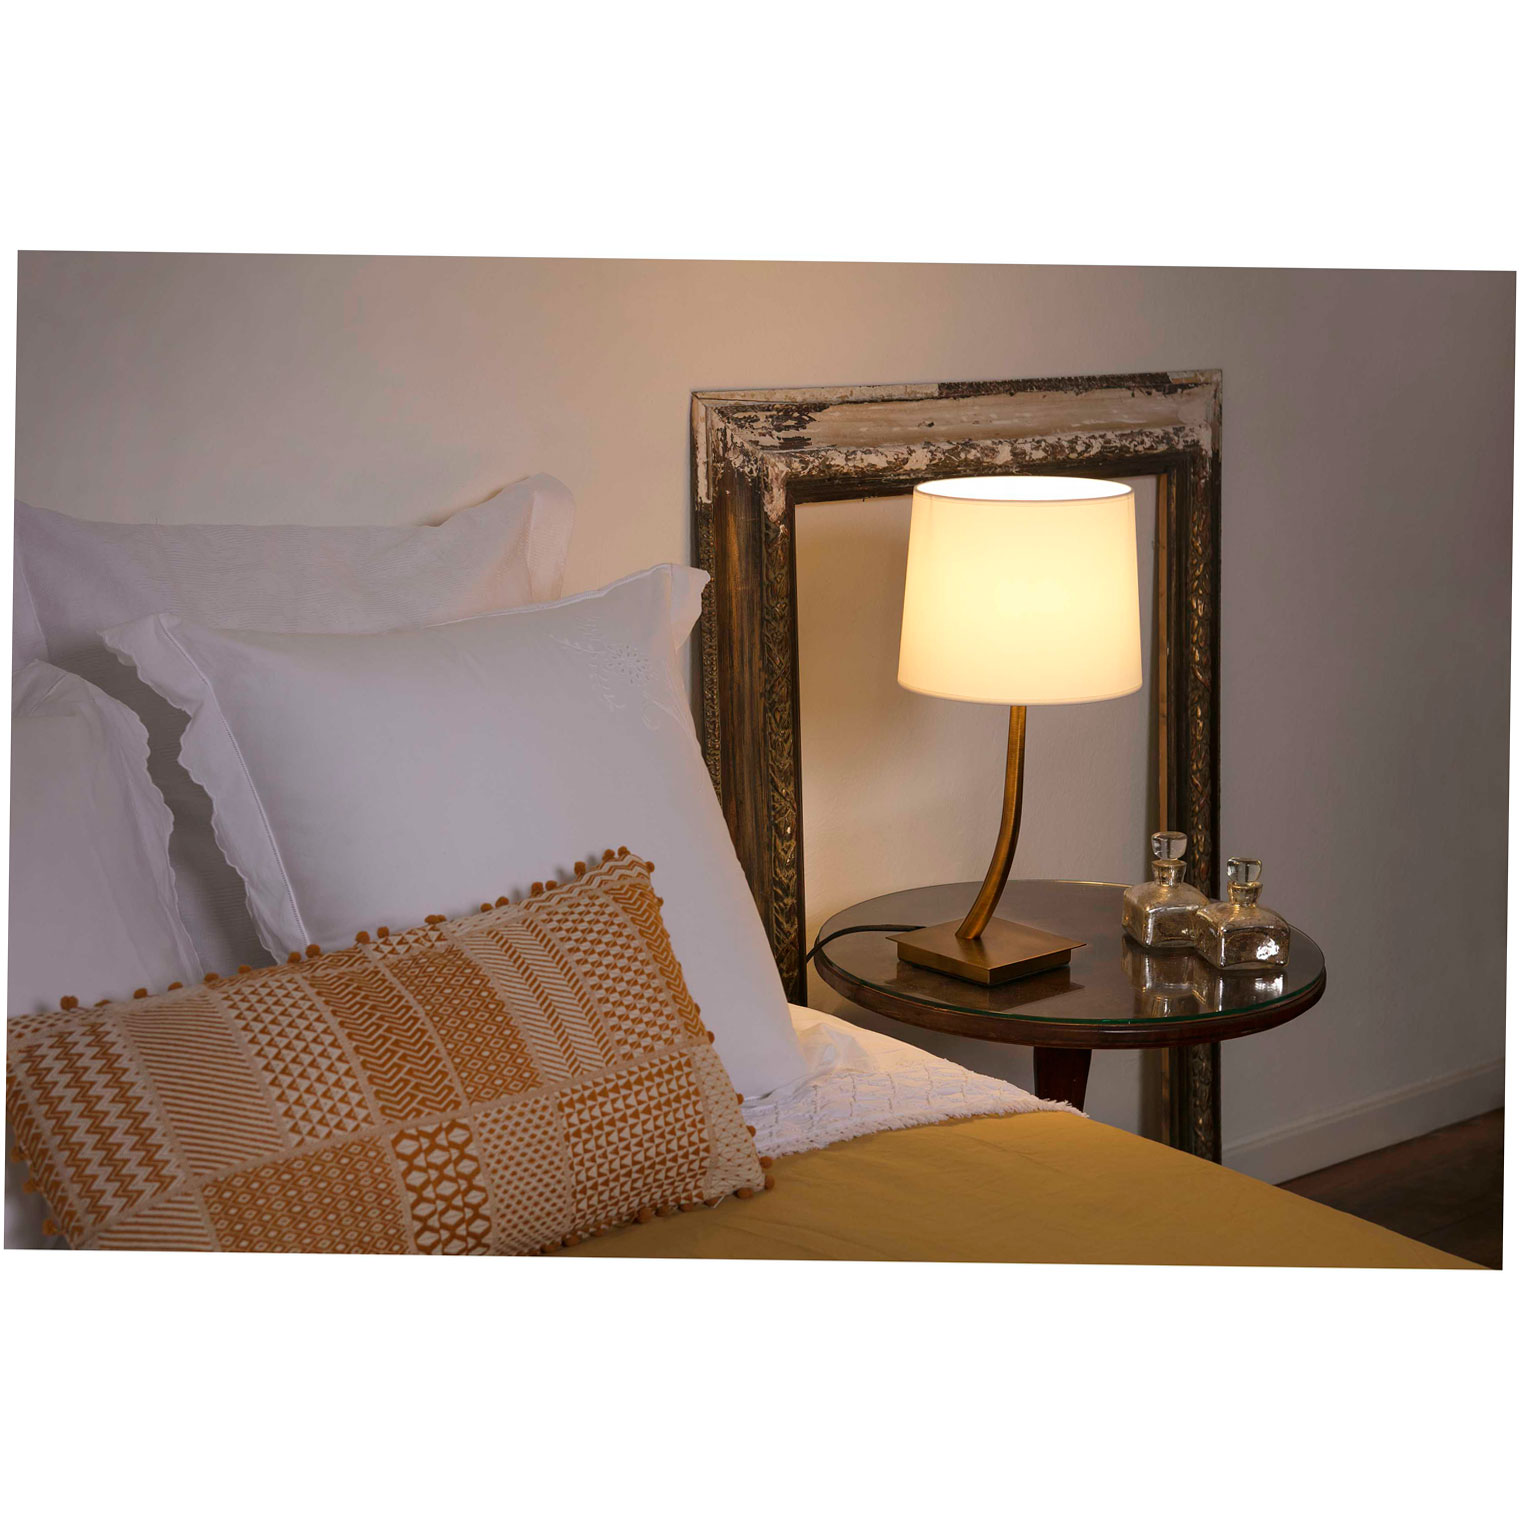 REM TABLE LAMP OLD GOLD 1 X E27